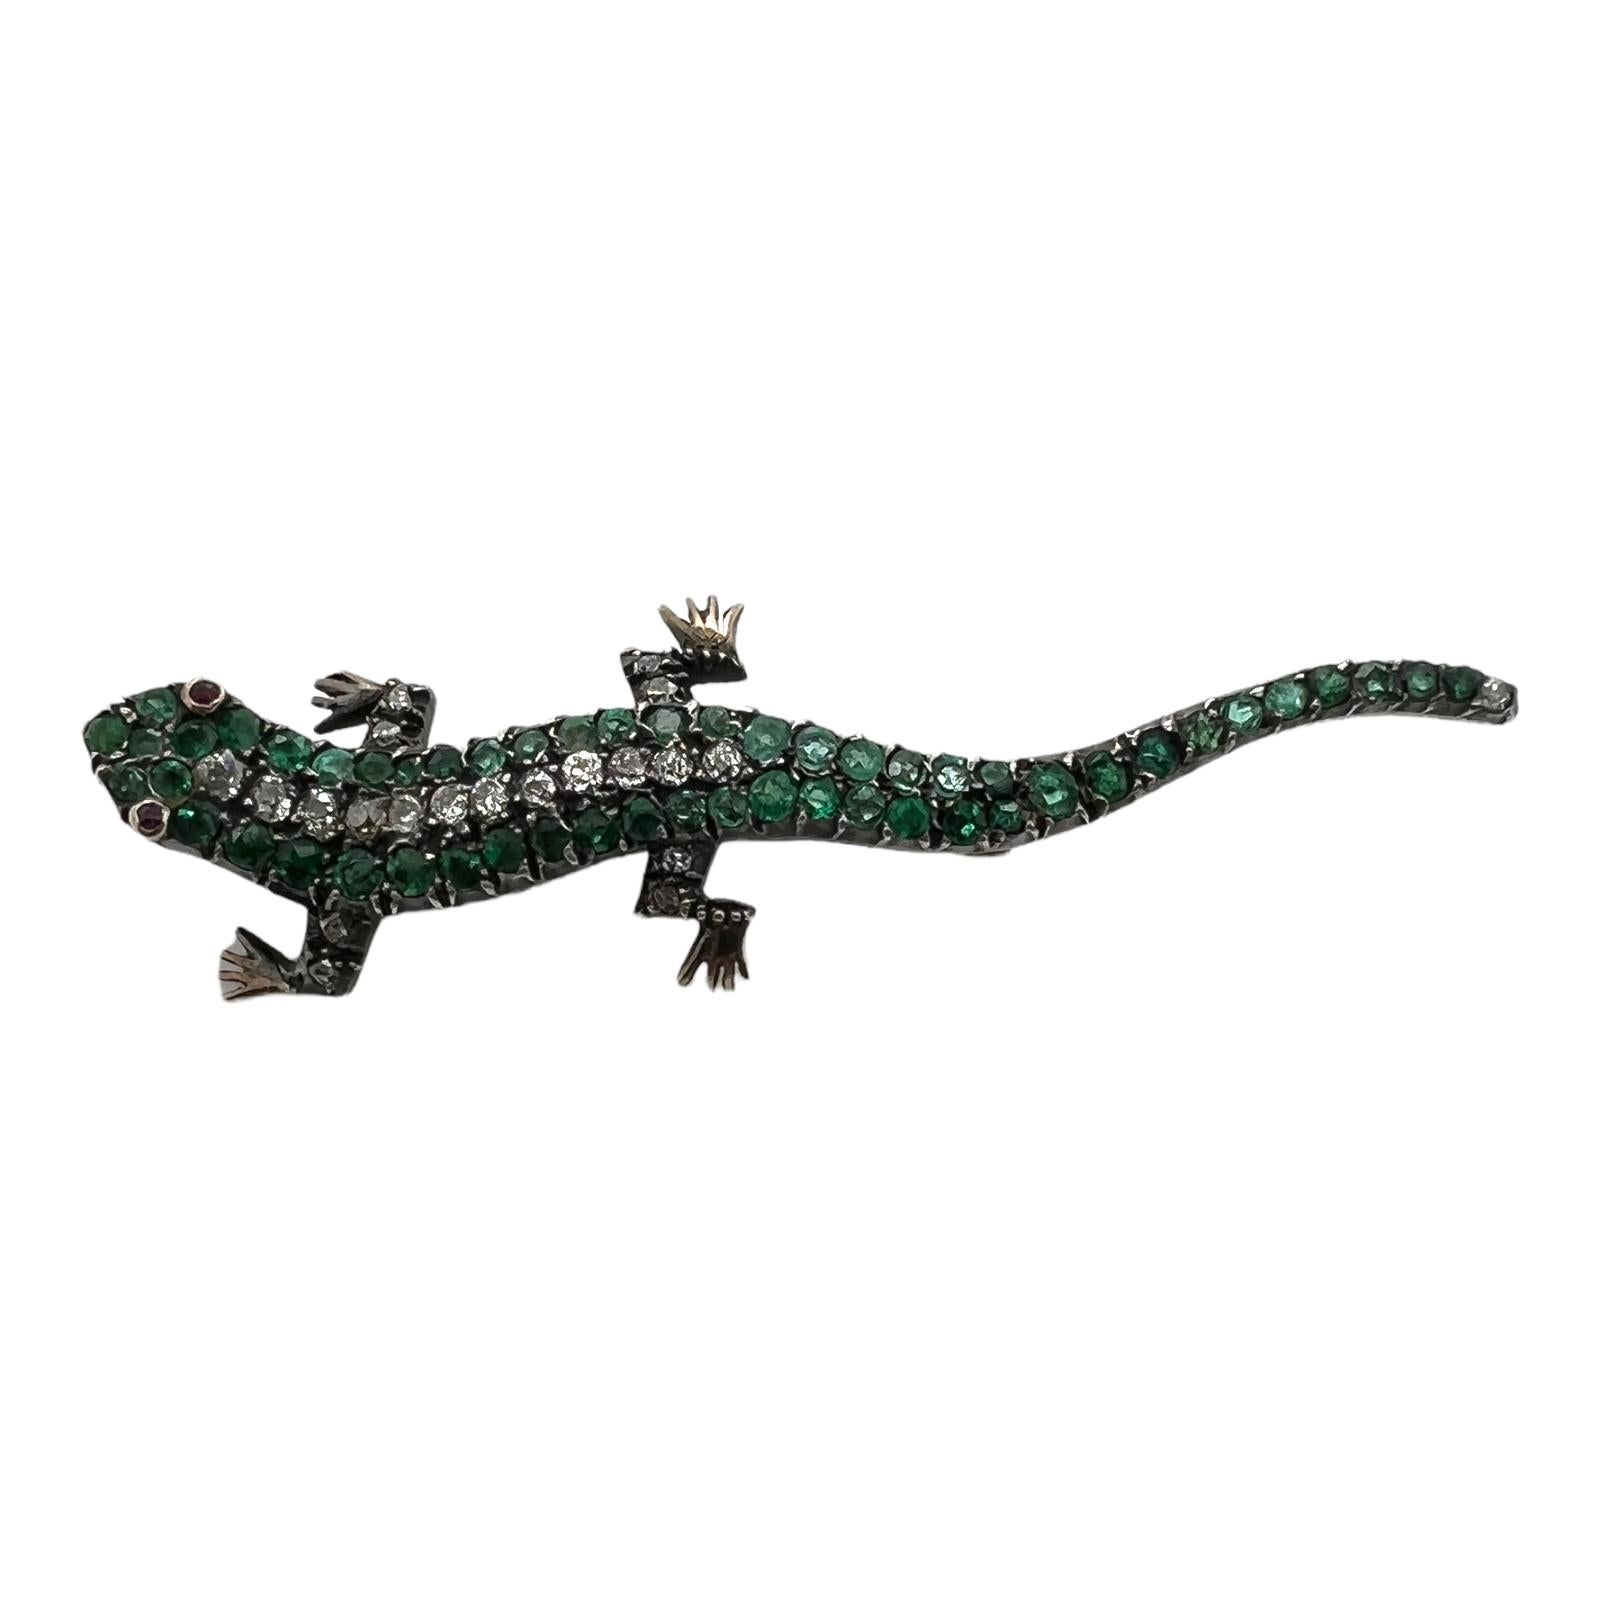 Fabulous Antique Diamond Emerald Salamander Brooch handcrafted in 14 karat yellow gold and sterling silver. The brooch features 13 Old Mine and Old European cut diamonds weighing approximately .25 CTW and 51 natural emeralds. The eyes are set with